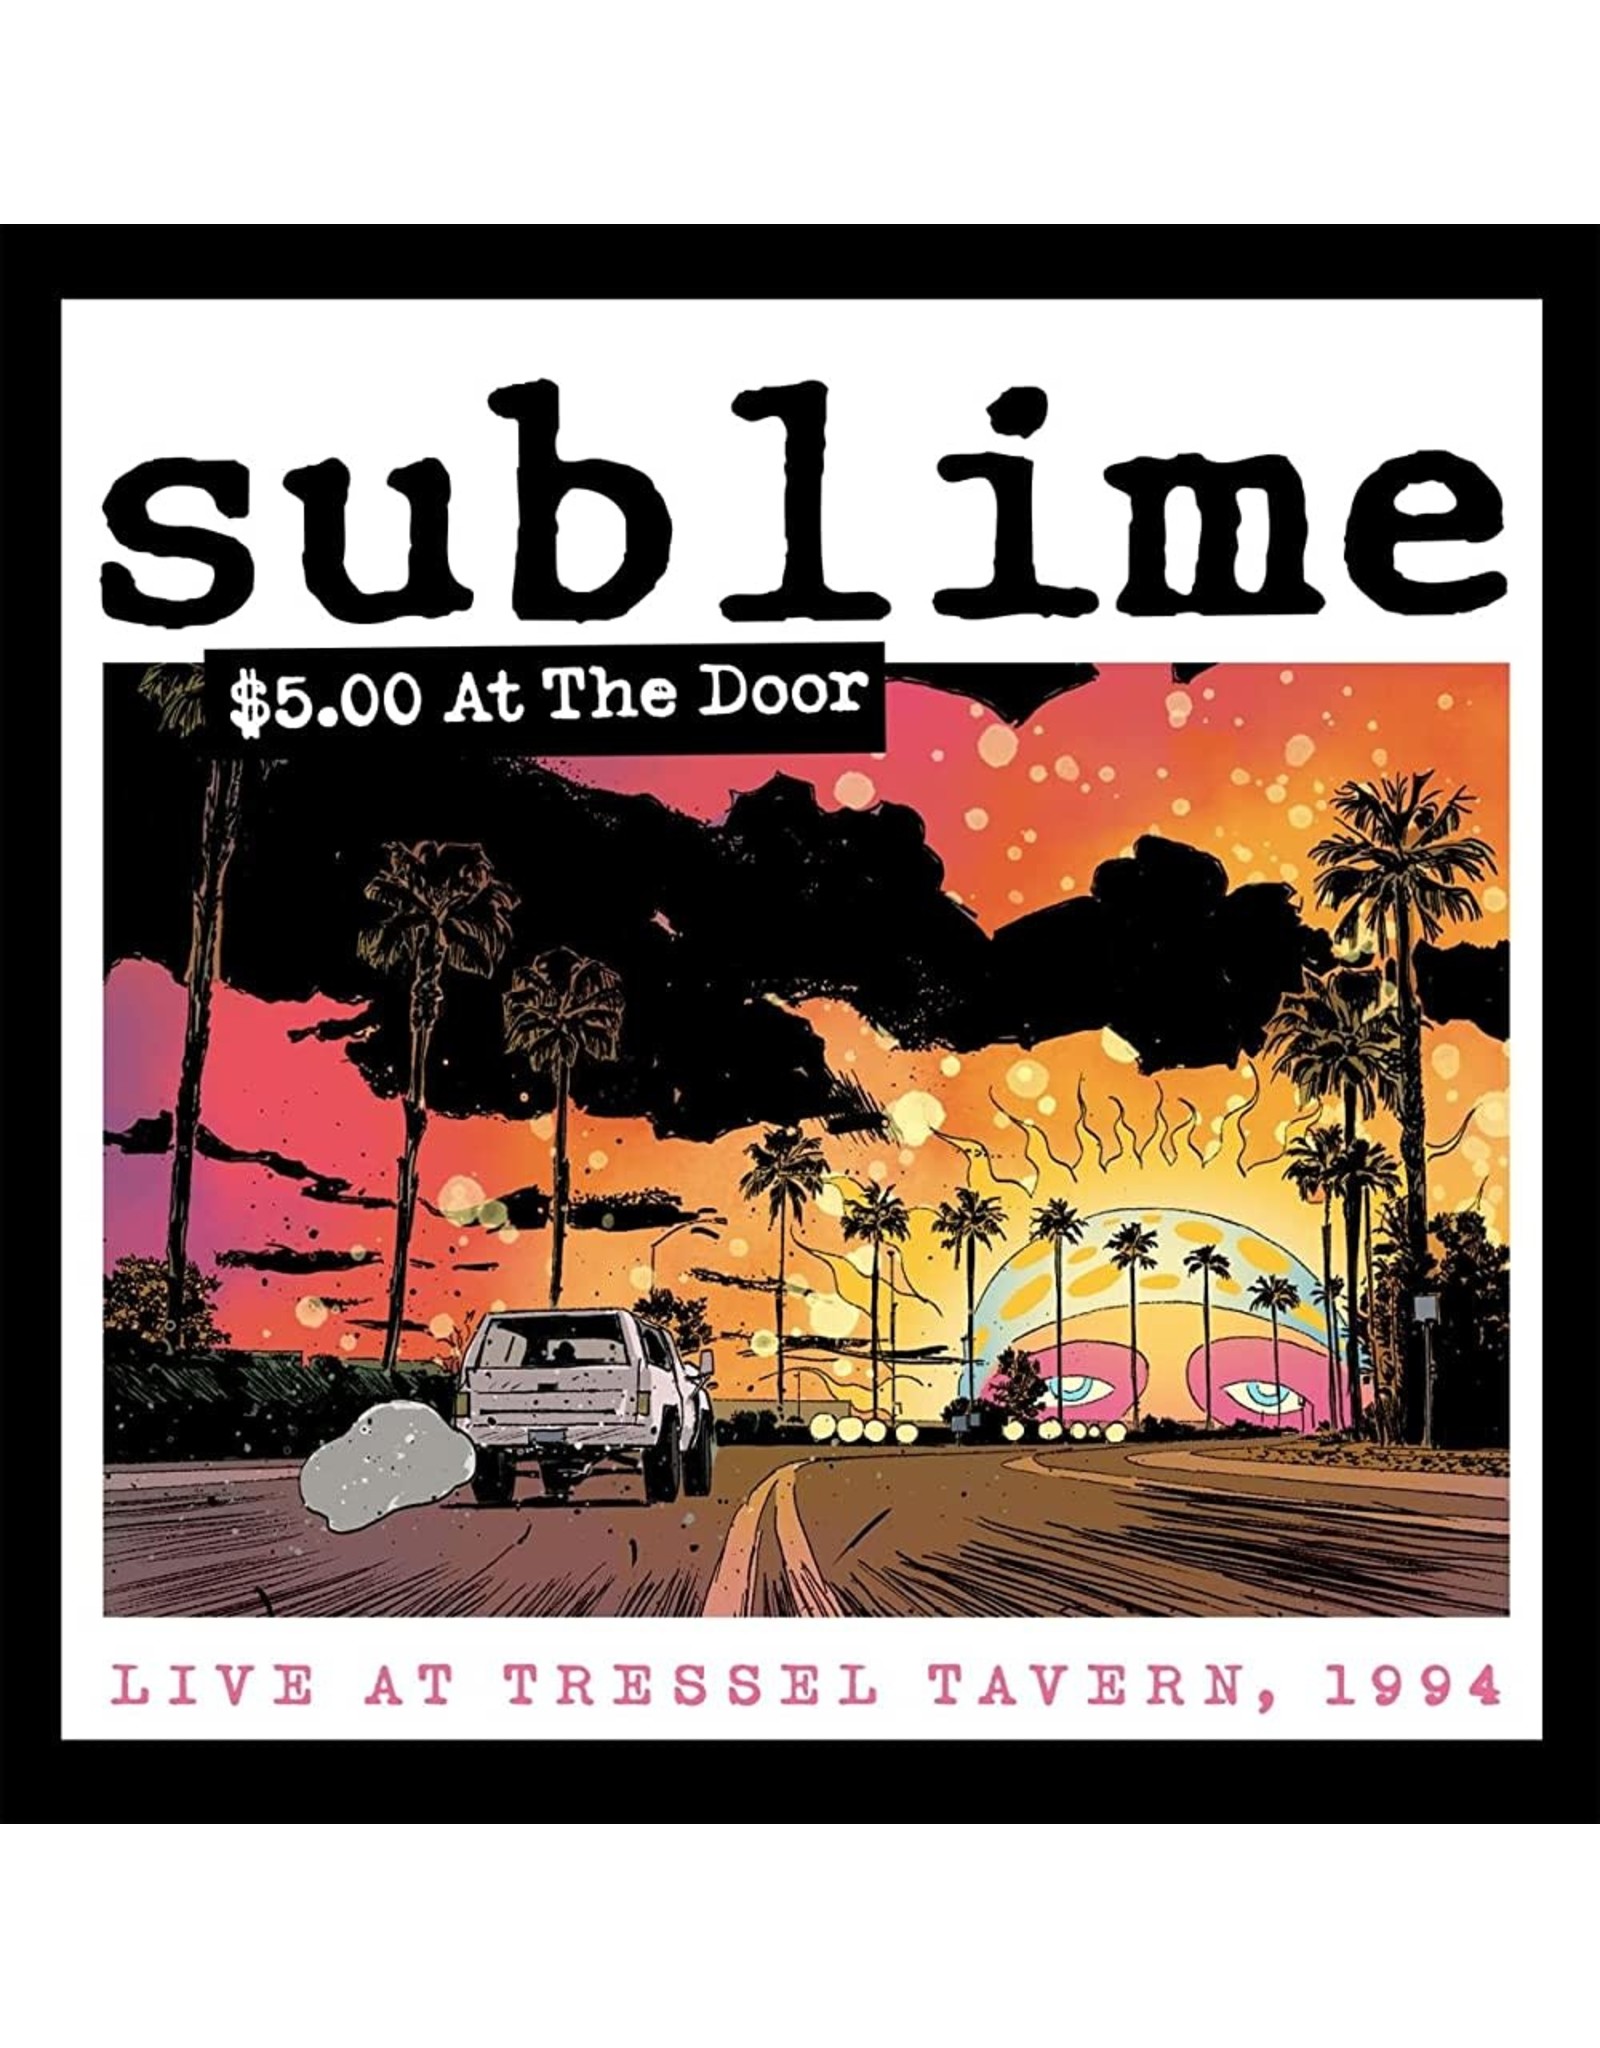 Sublime - $5.00 At The Door: Live at Tressel Tavern, 1994